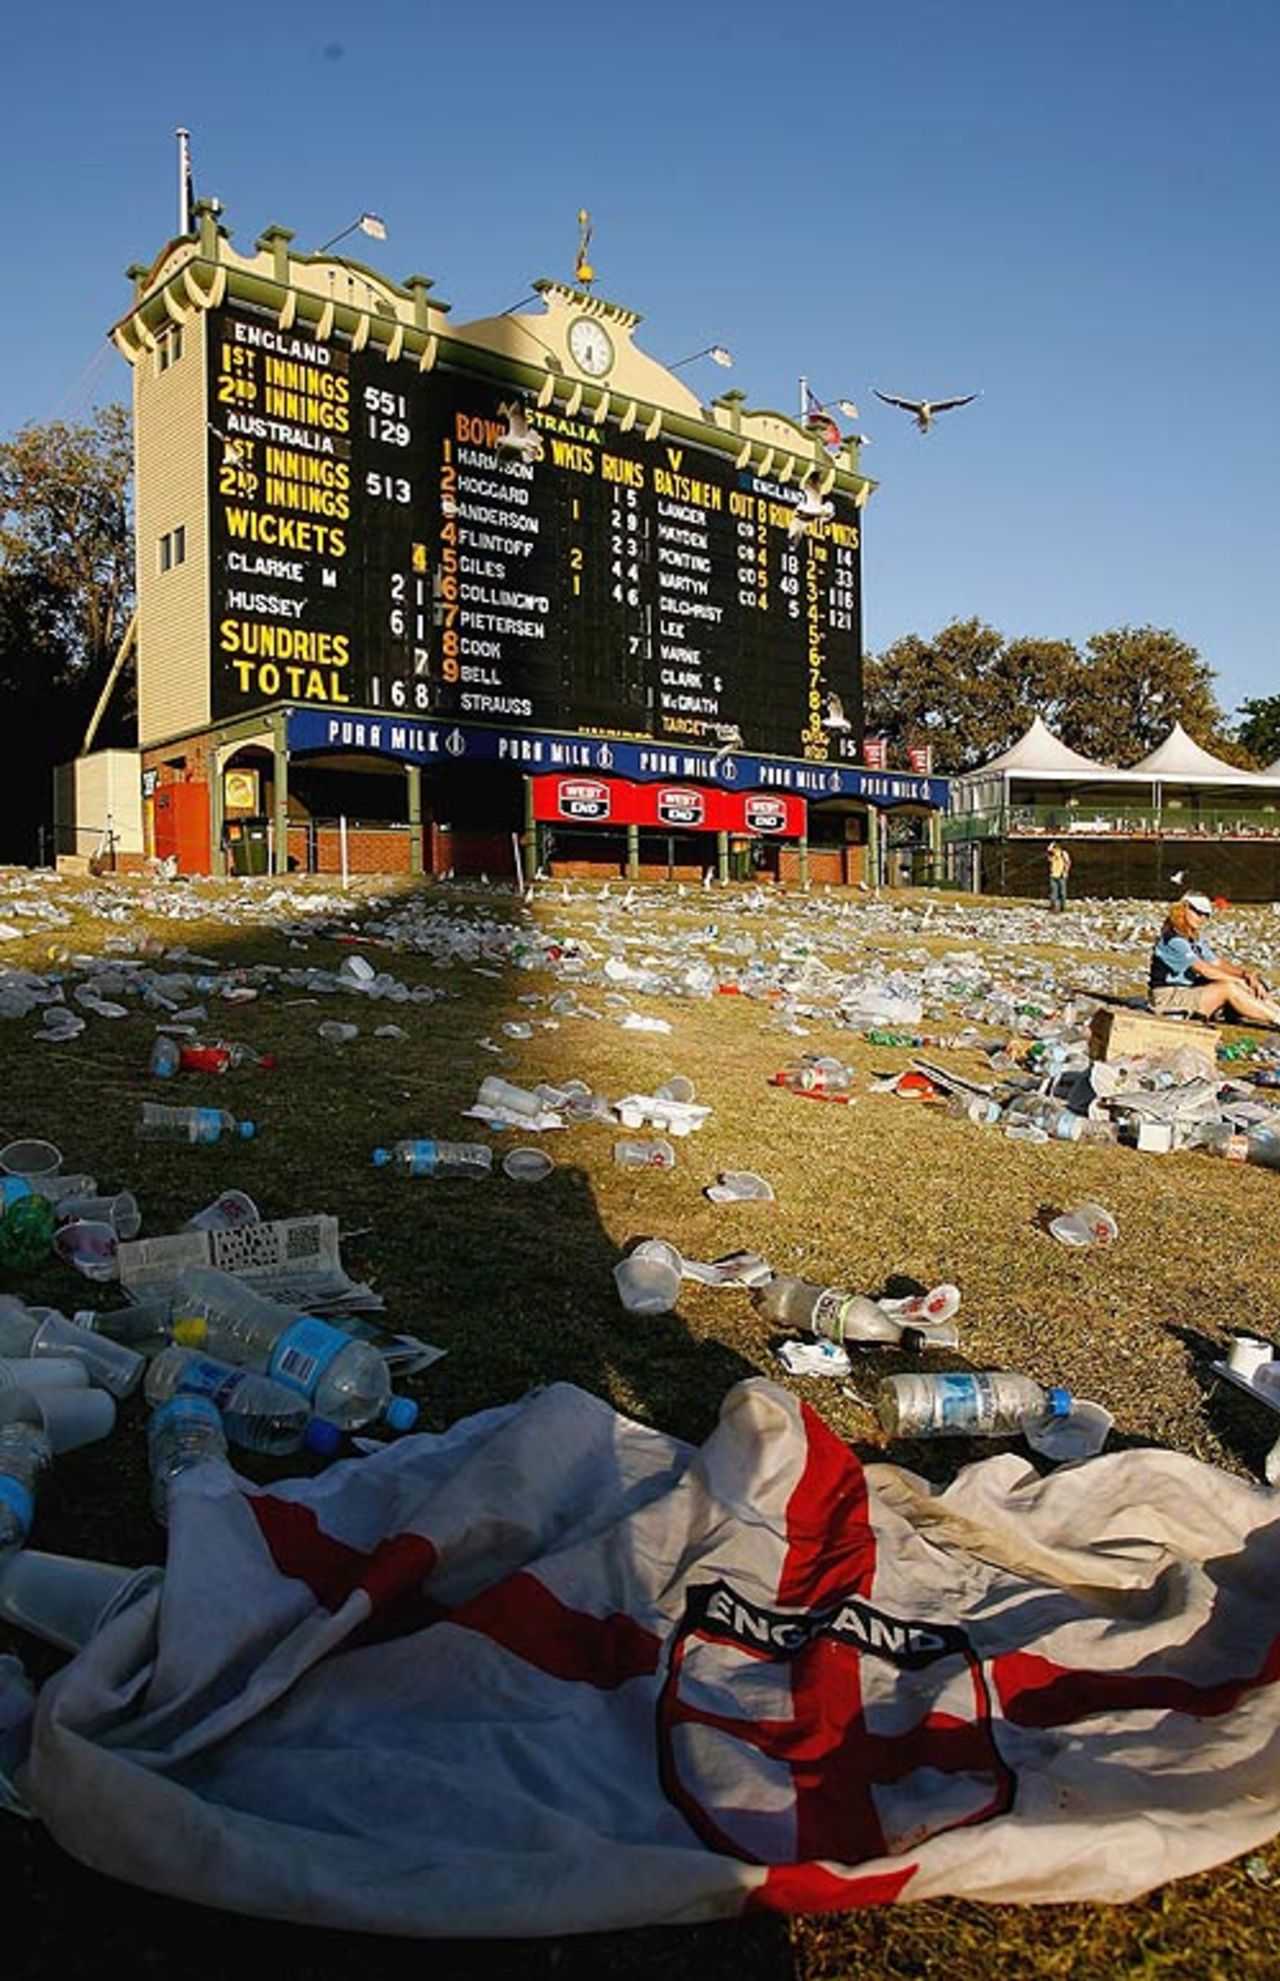 The hill in front of the scoreboard is deserted after the end of play, Australia v England, 2nd Test, Adelaide, December 5, 2006